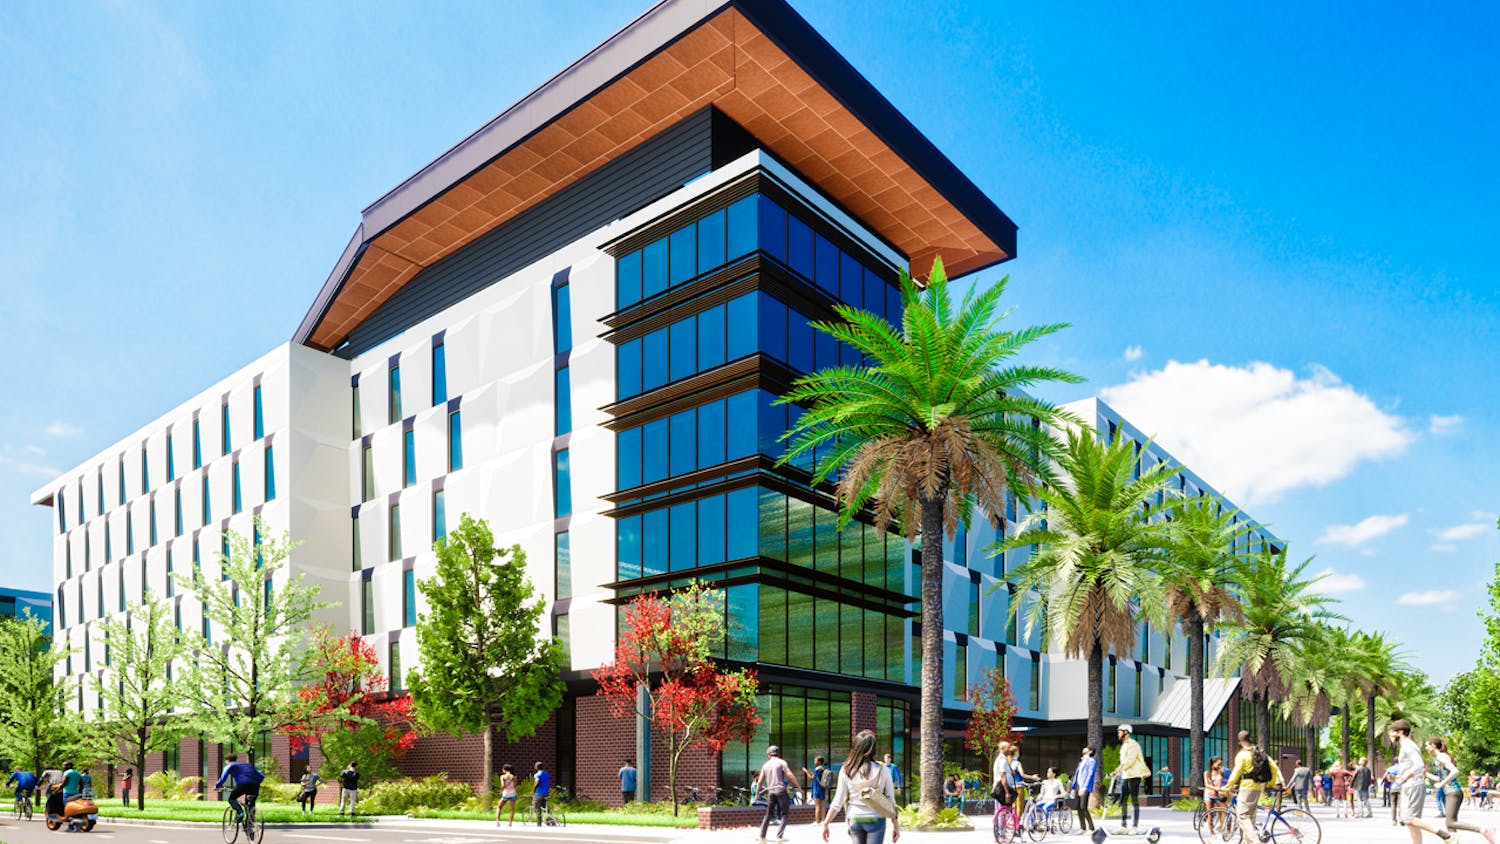 A rendering of the UF Honors Village, available on the website advertising the housing option.